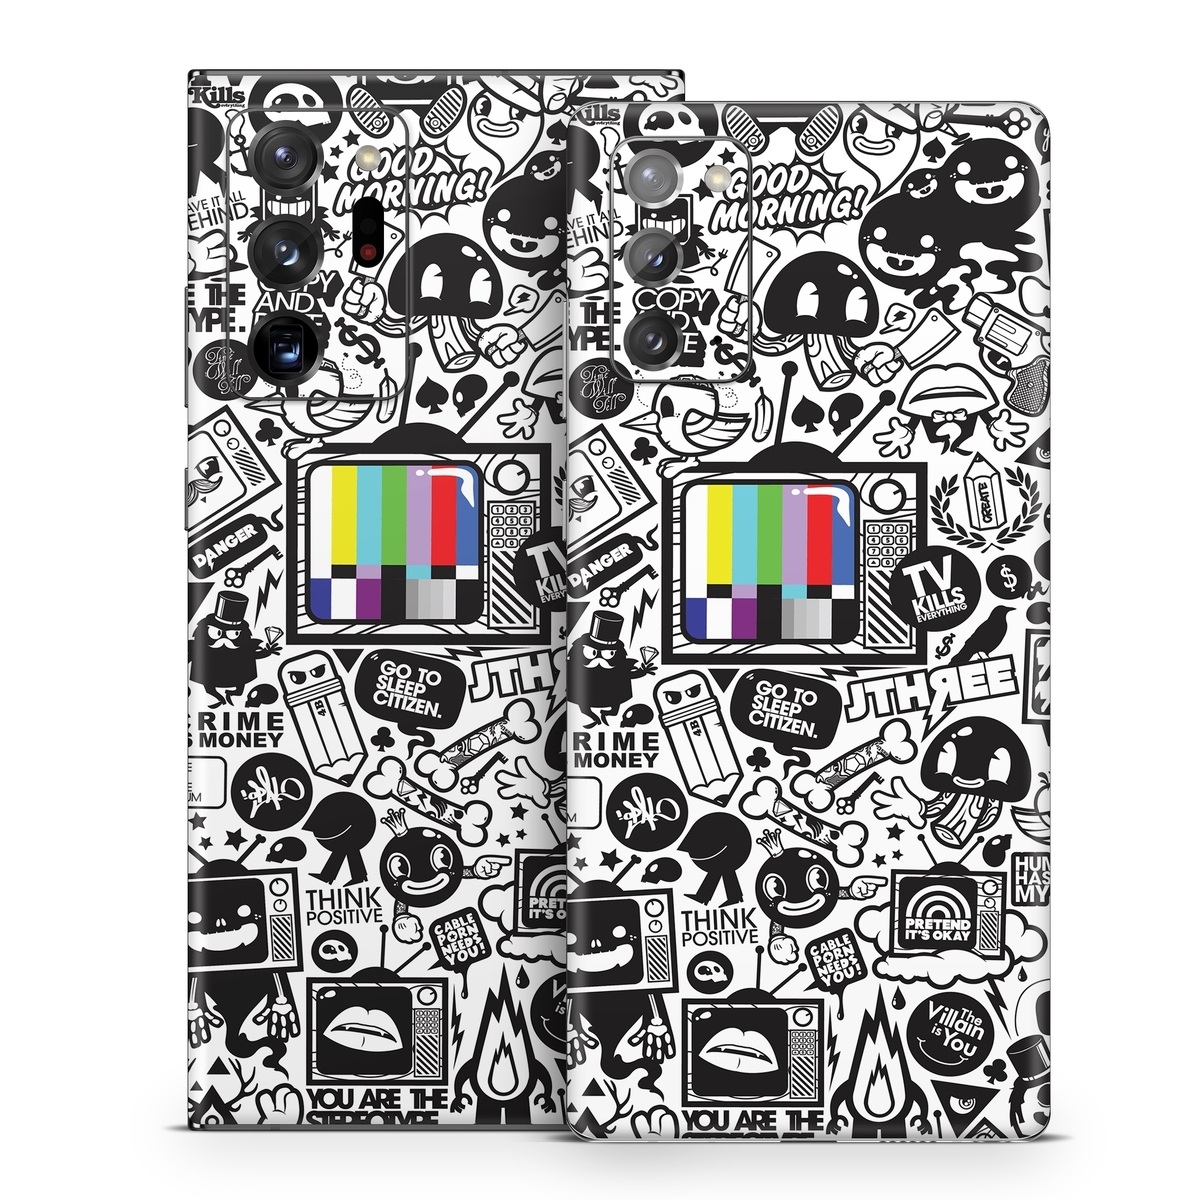 Samsung Galaxy Note 20 Series Skin design of Pattern, Drawing, Doodle, Design, Visual arts, Font, Black-and-white, Monochrome, Illustration, Art, with gray, black, white colors